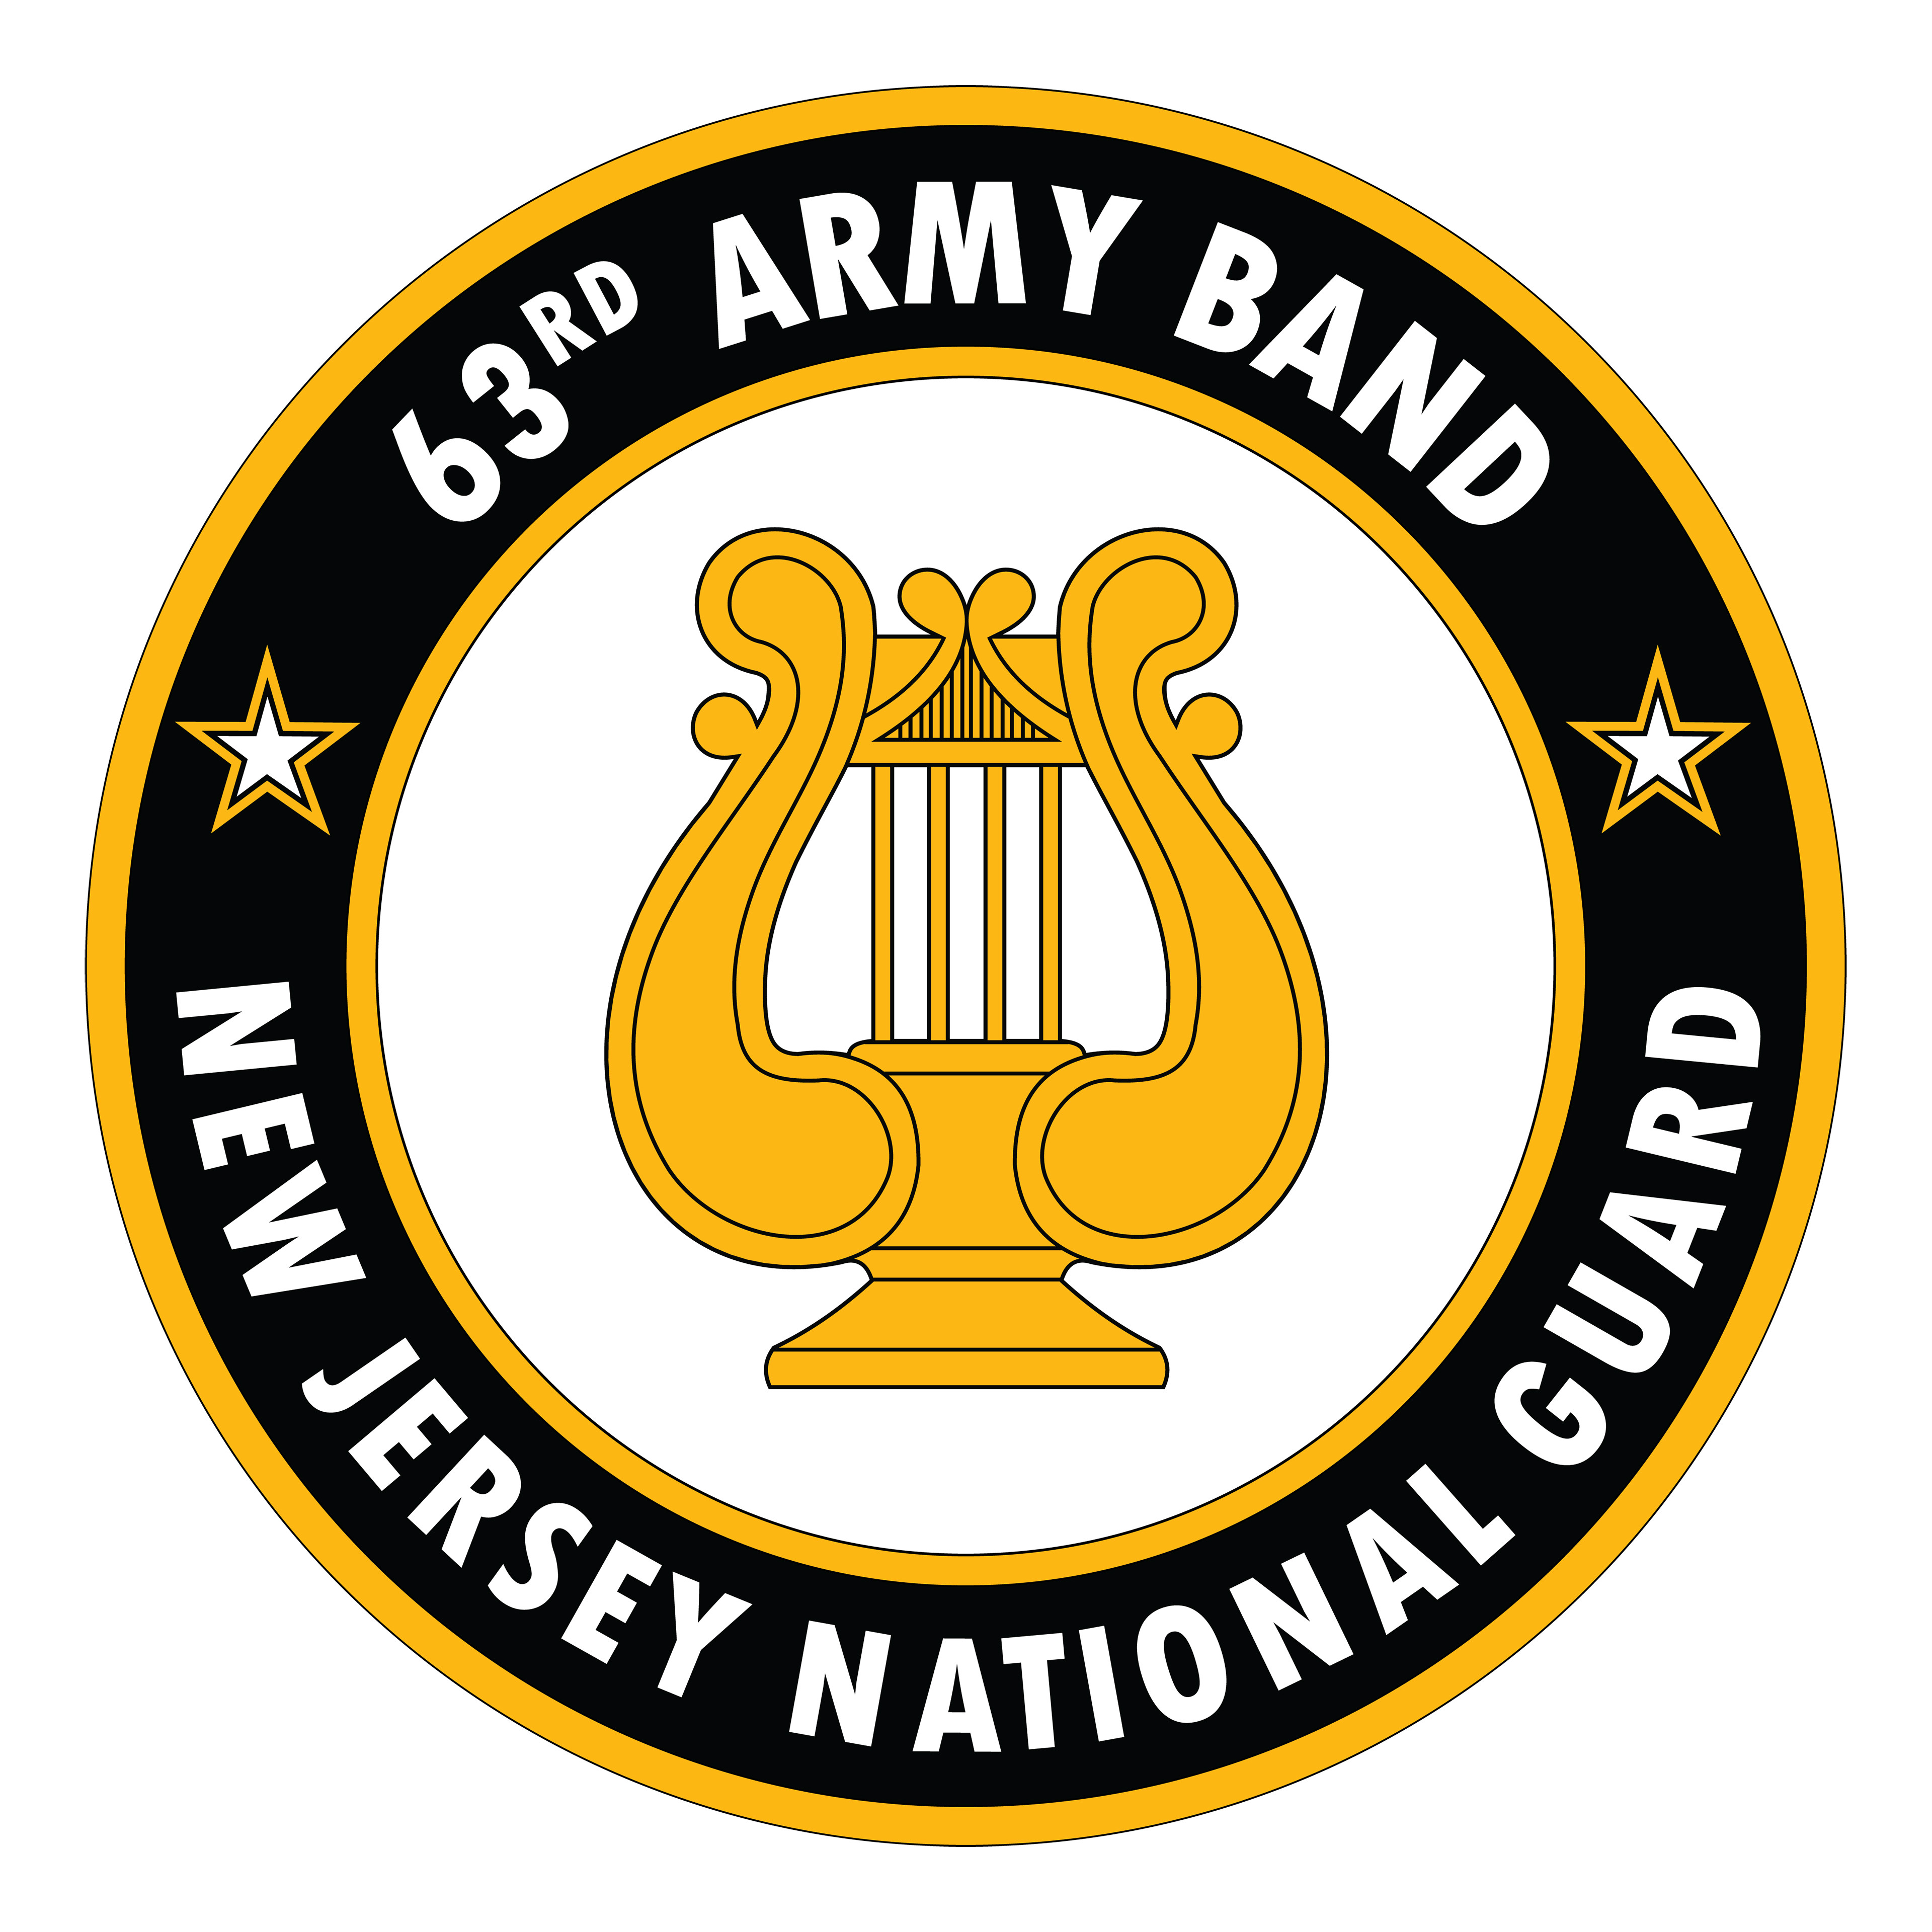 The final / approved design for the 63rd Army . 